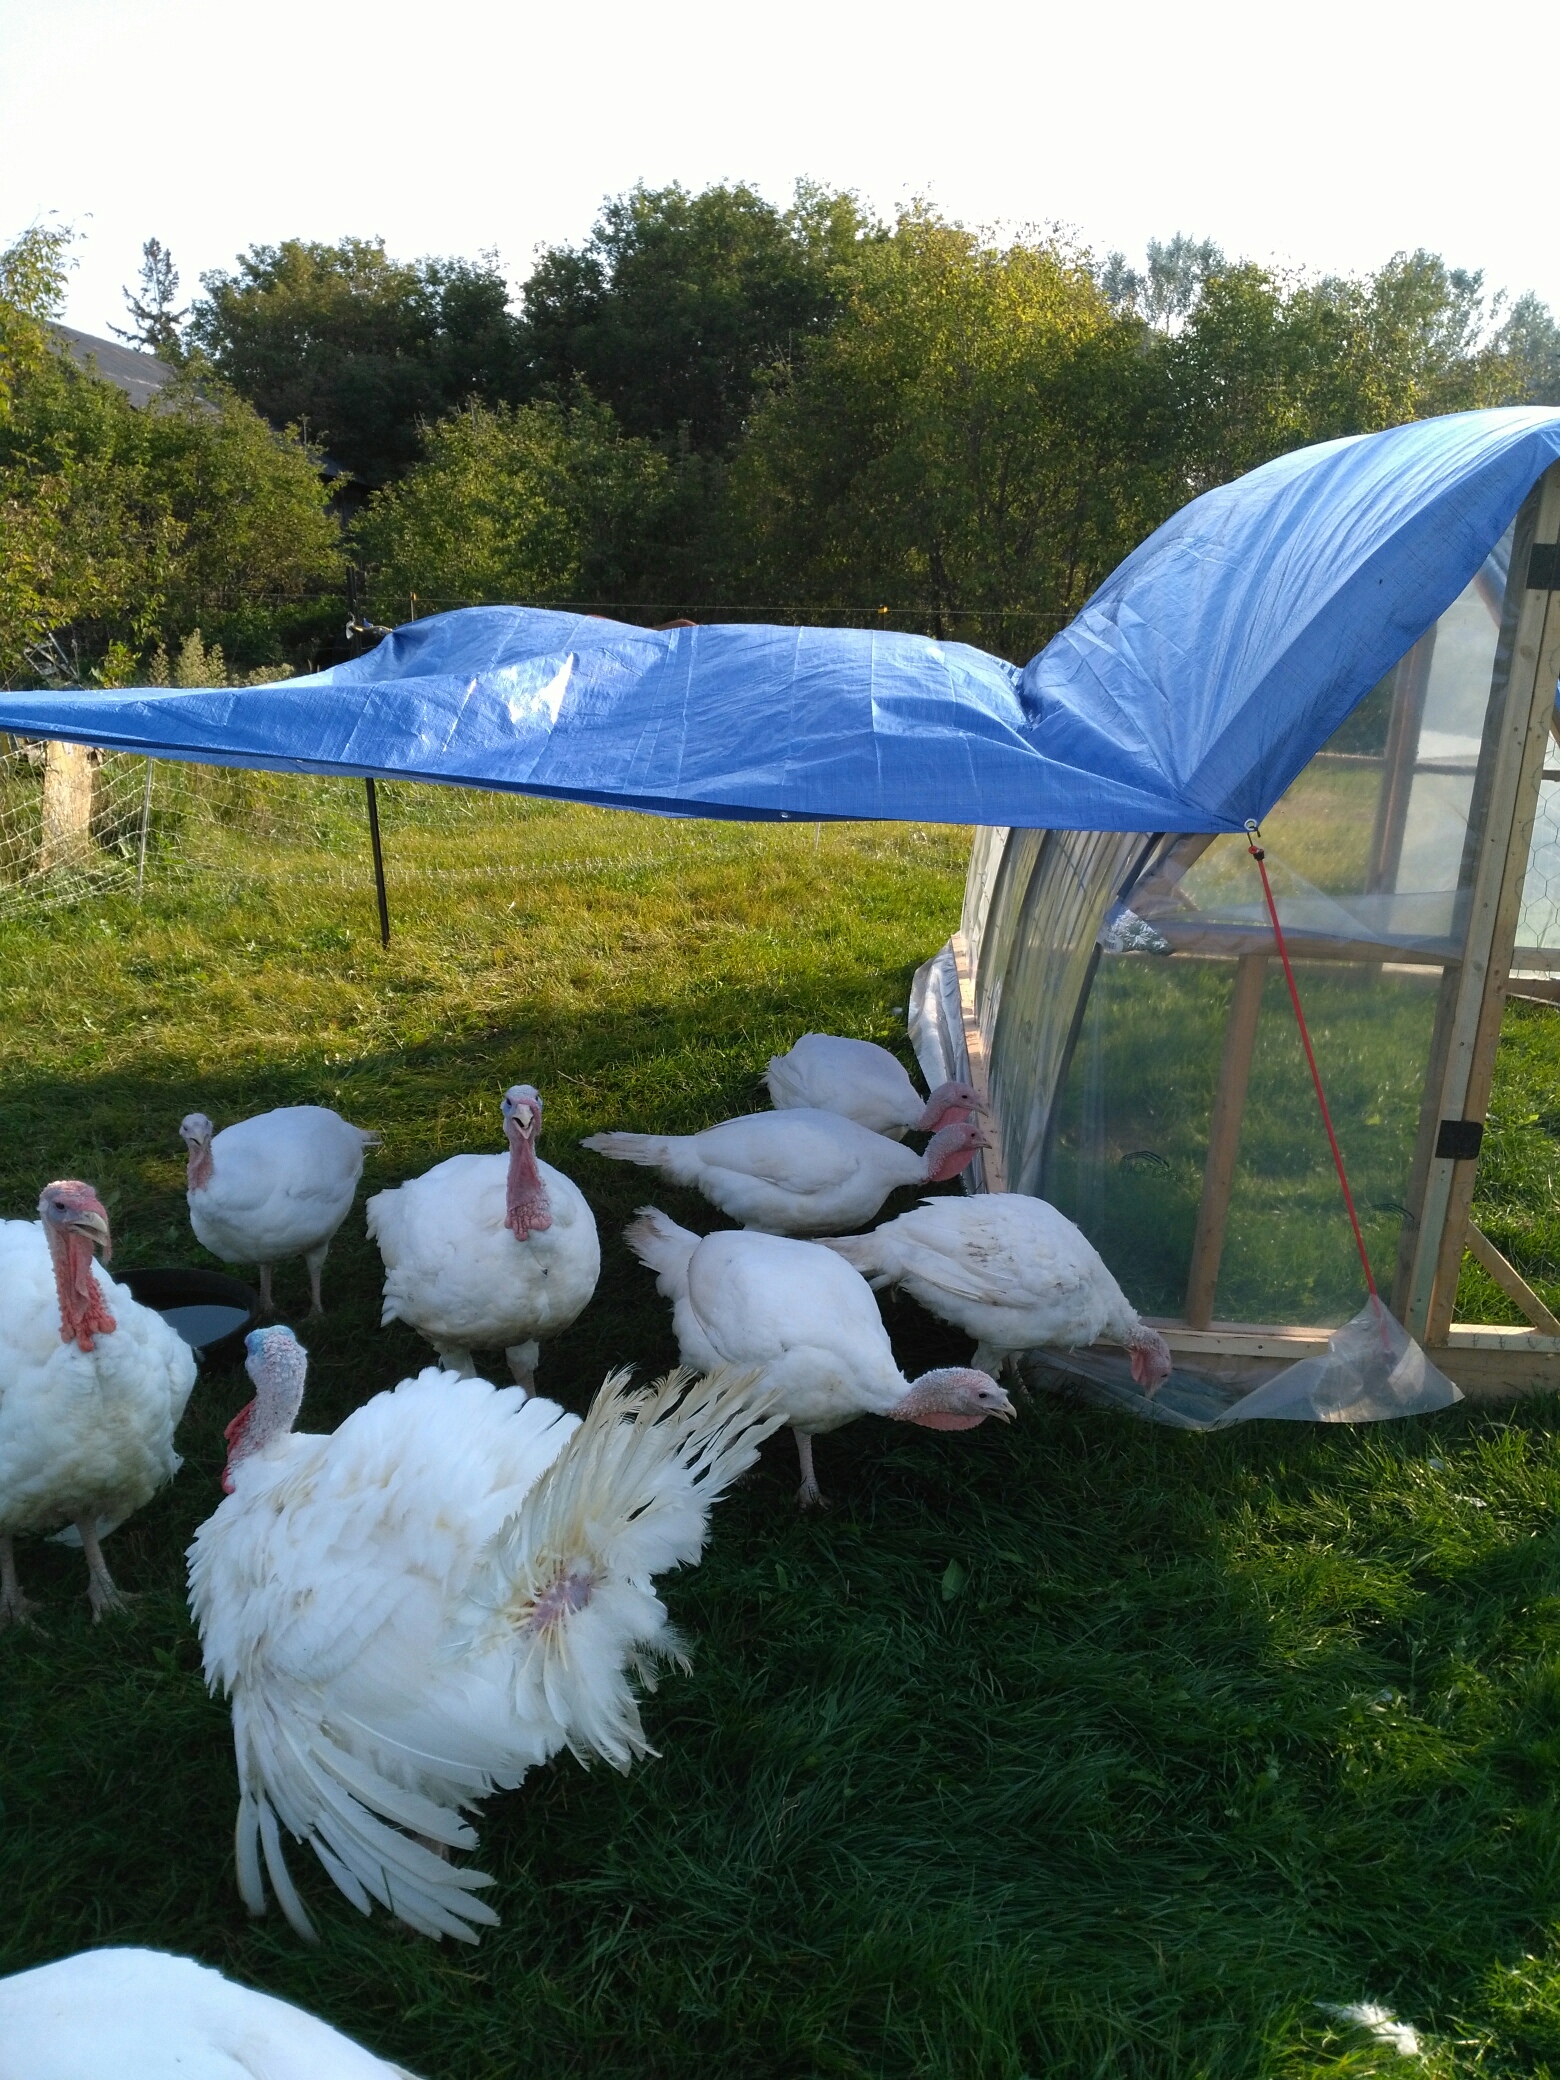 Here are a few chicken coop ideas and simple chicken coop plans for the backyard or small farm